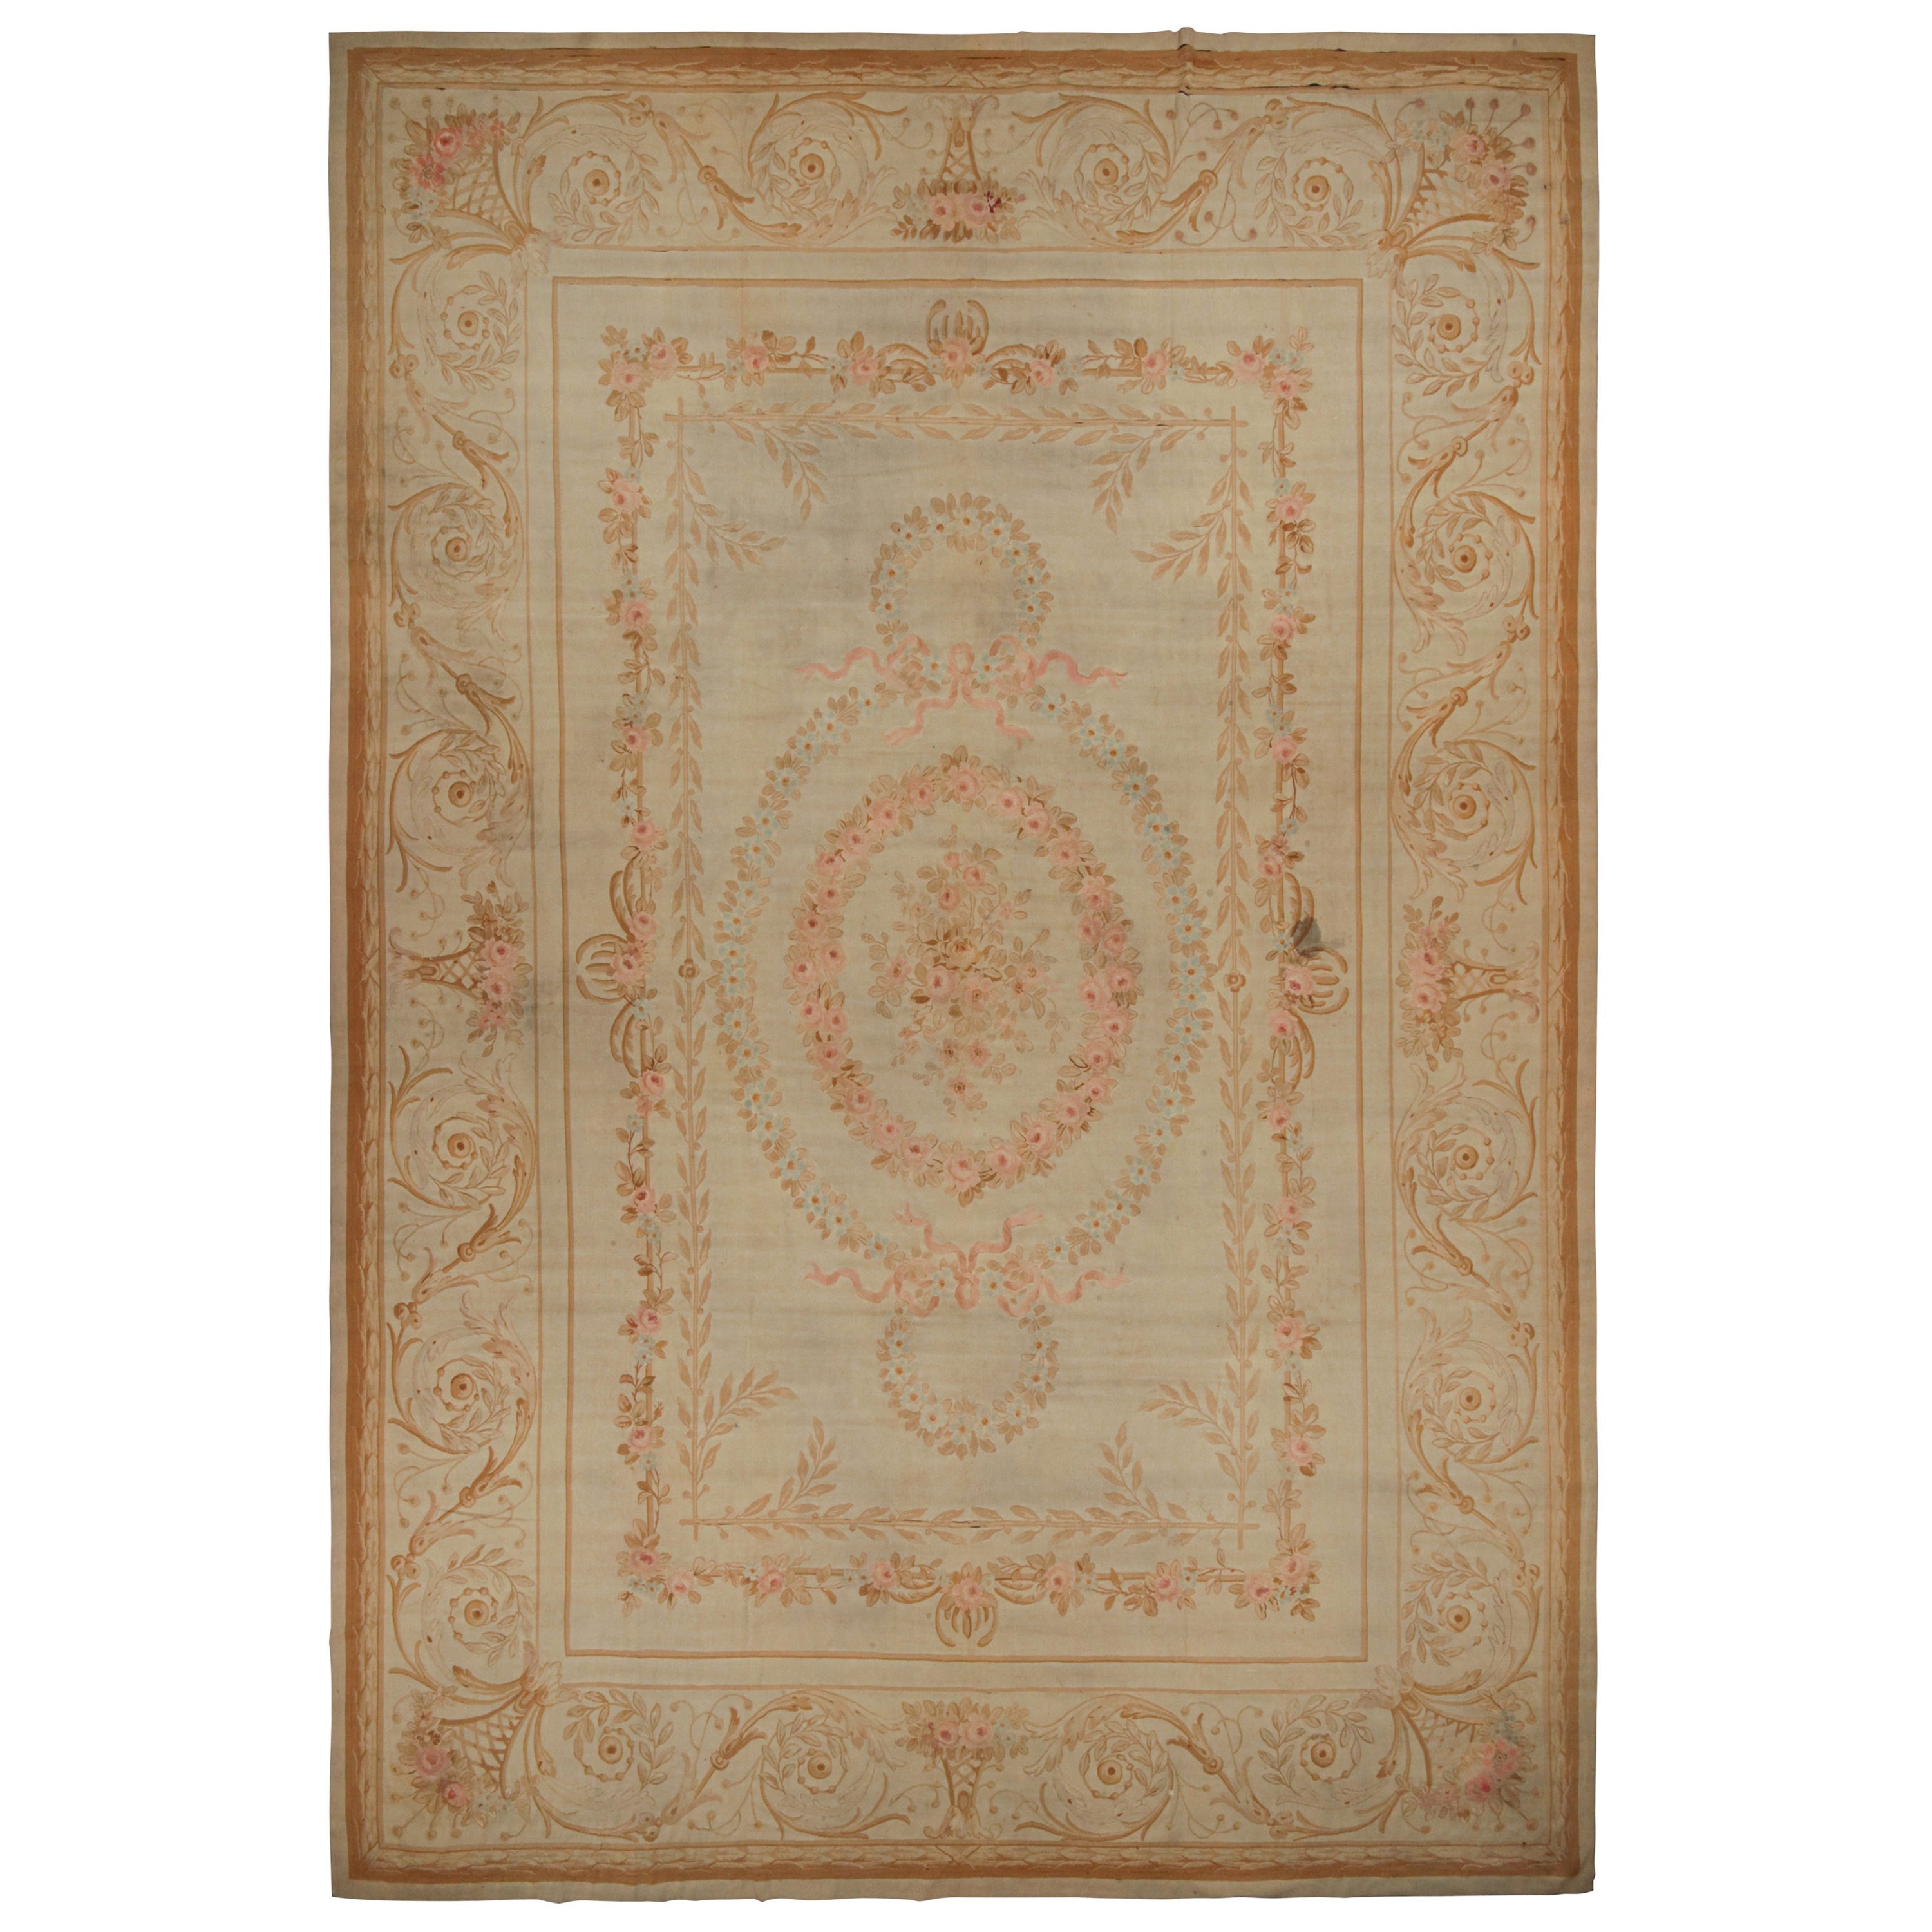 Oversized Antique Aubusson Flatweave Floral Rug in Beige & Pink For Sale